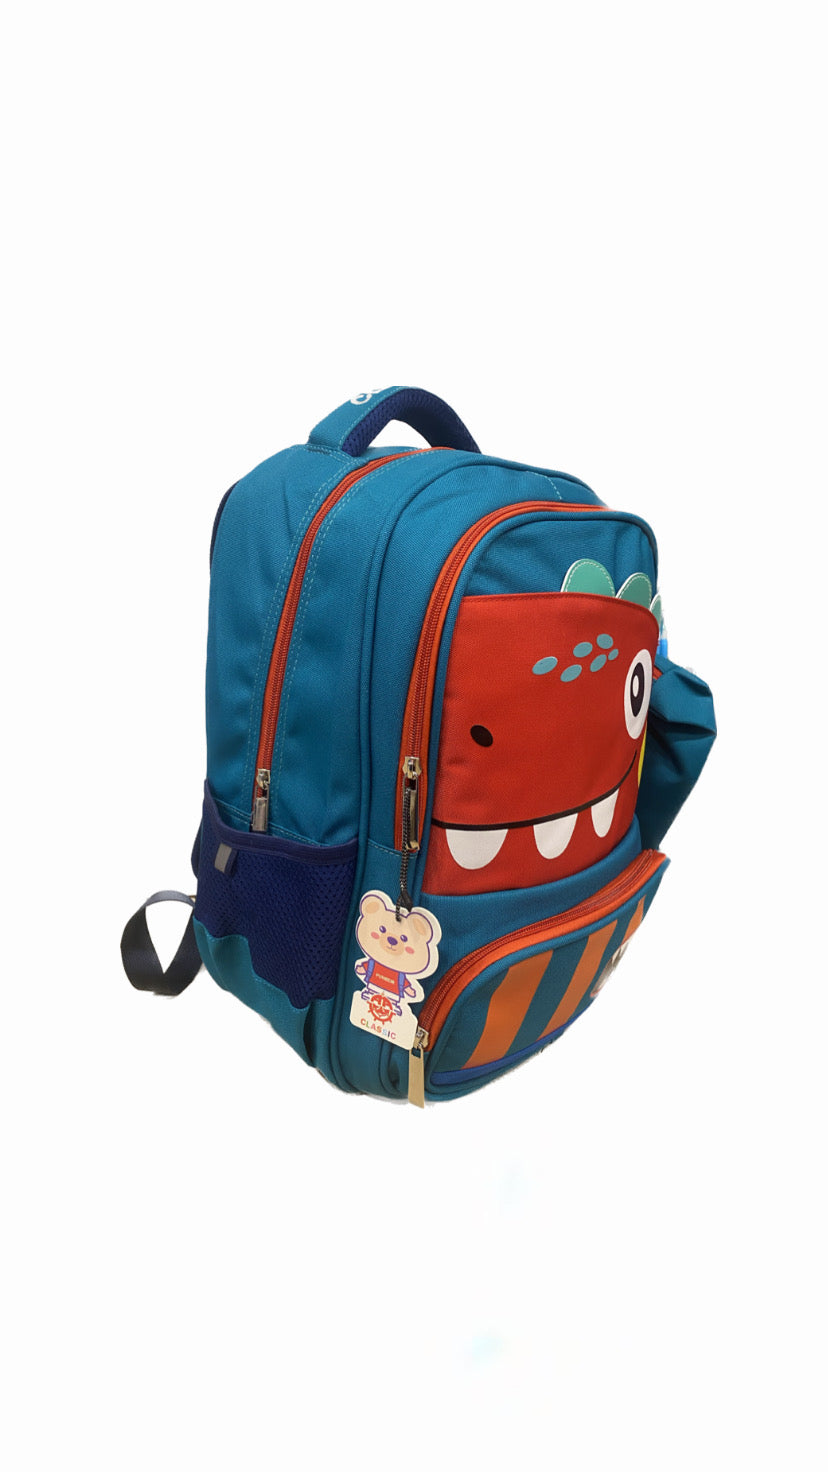 Classic Red Dino School Bag Size 17